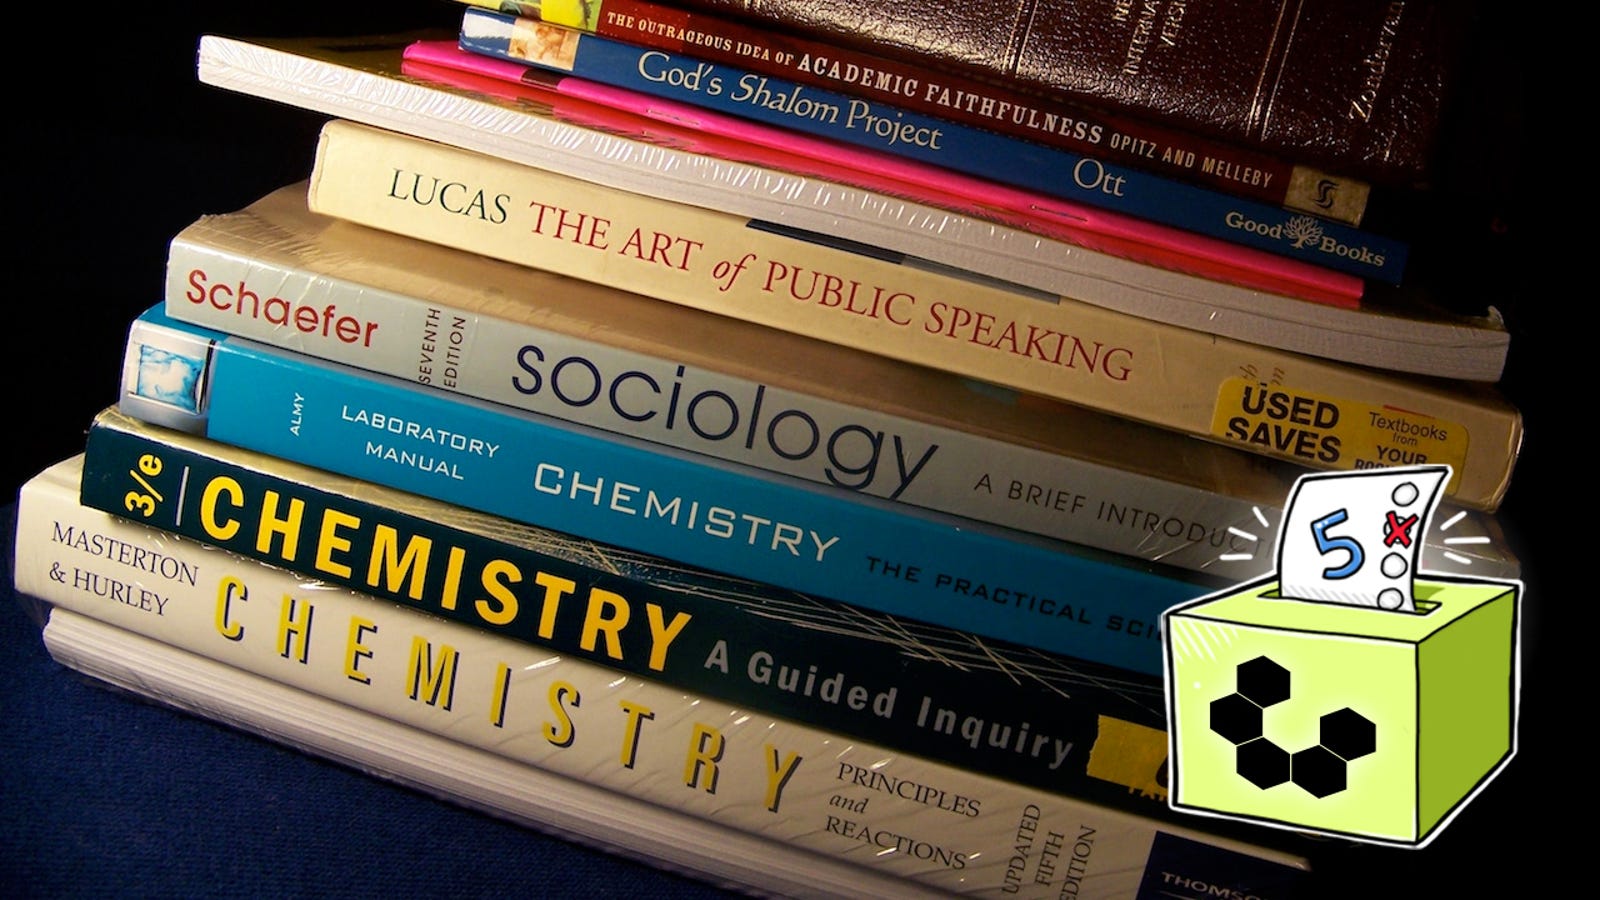 Top 10 Tips for Buying Cheap Textbooks Online